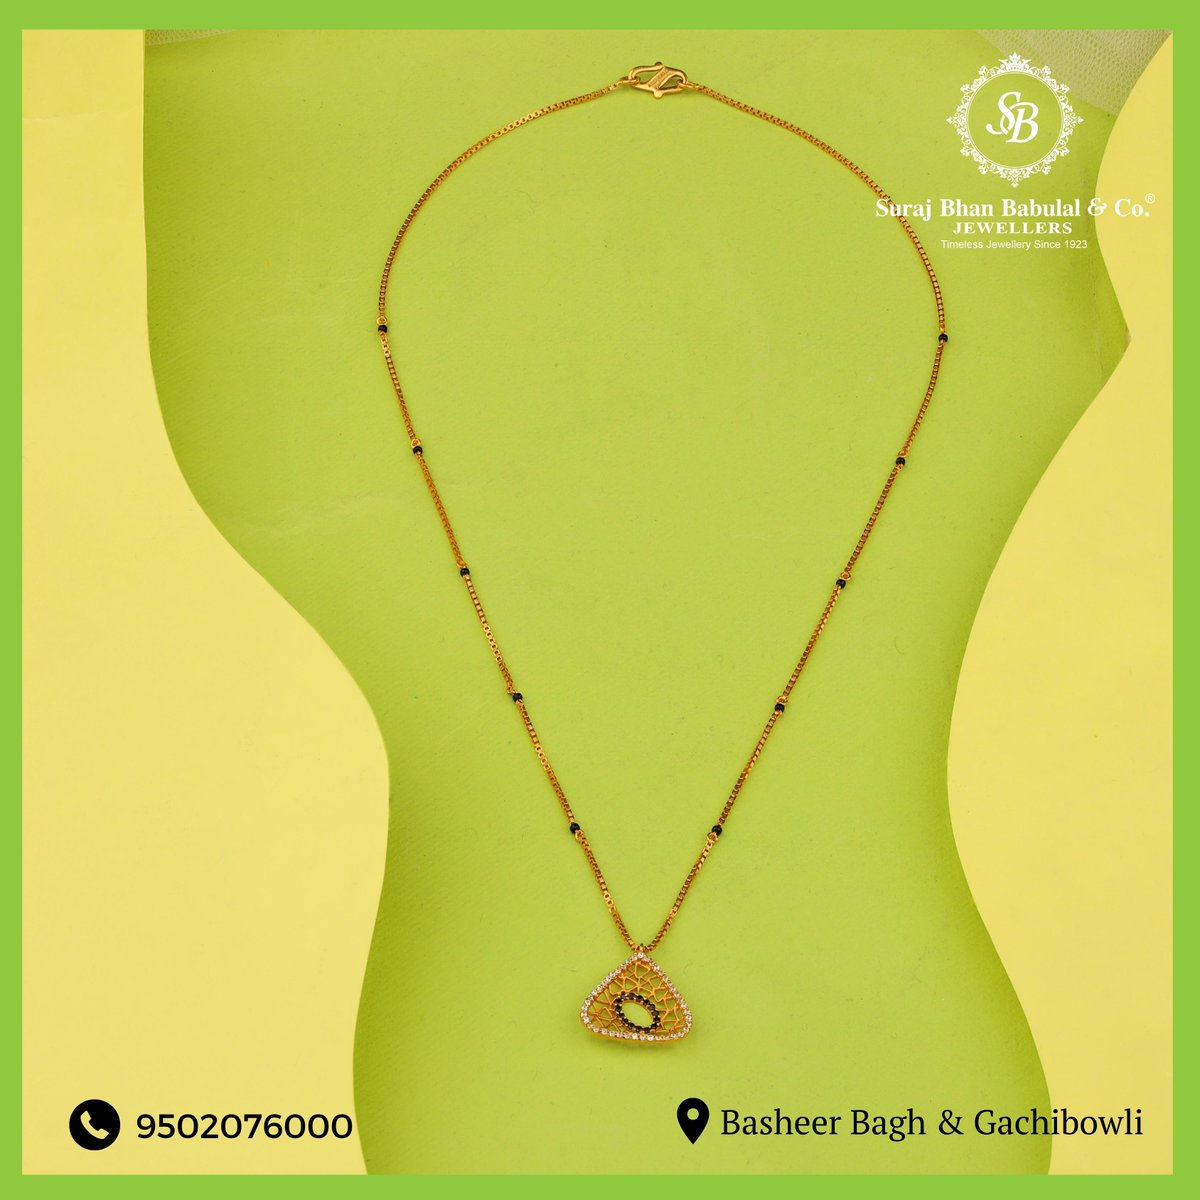 Let this sleek Gold Chain be your style Companion for every Occasion.
For inquiries please contact - 7997995580.
.
.
.
#JewelryLove #LuxuryJewelry #ElegantJewelry #TimelessPiece #FineJewelry #StatementPiece #HighEndJewelry #surajbhanbabulagachibowli #surajbhanbabulajewelleryhub